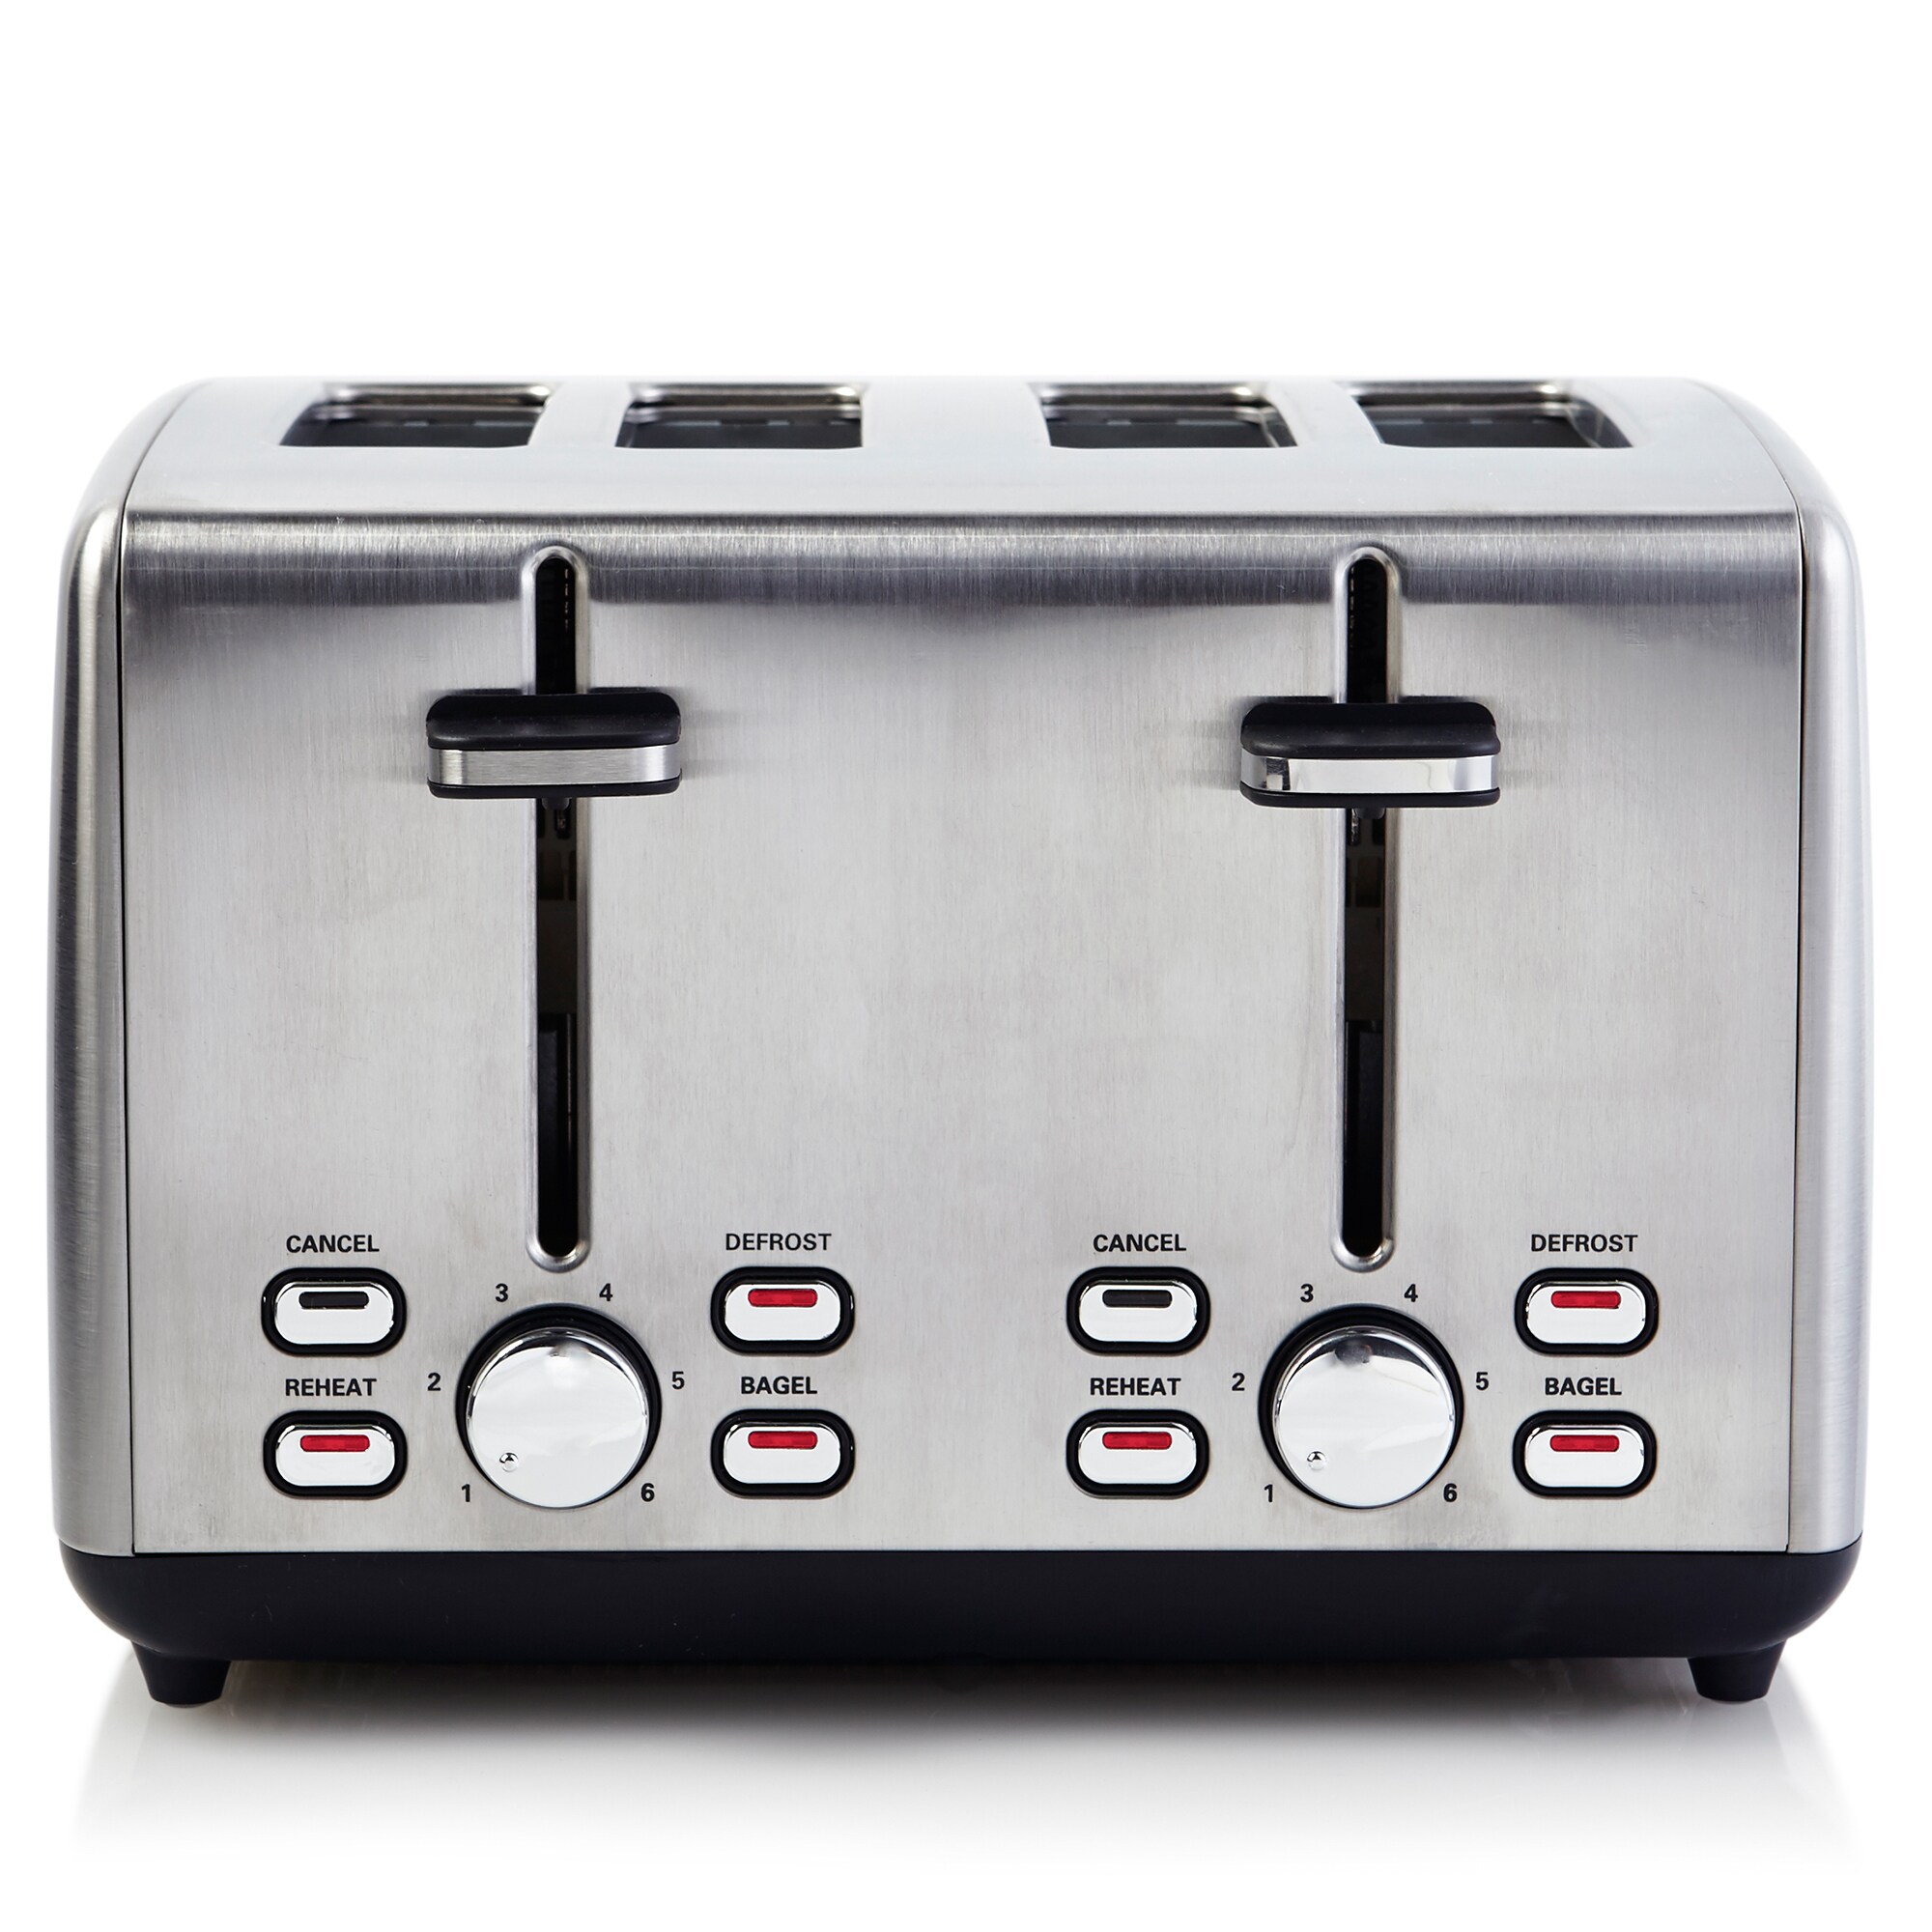 MegaChef 4 Slice Toaster in Stainless Steel Silver